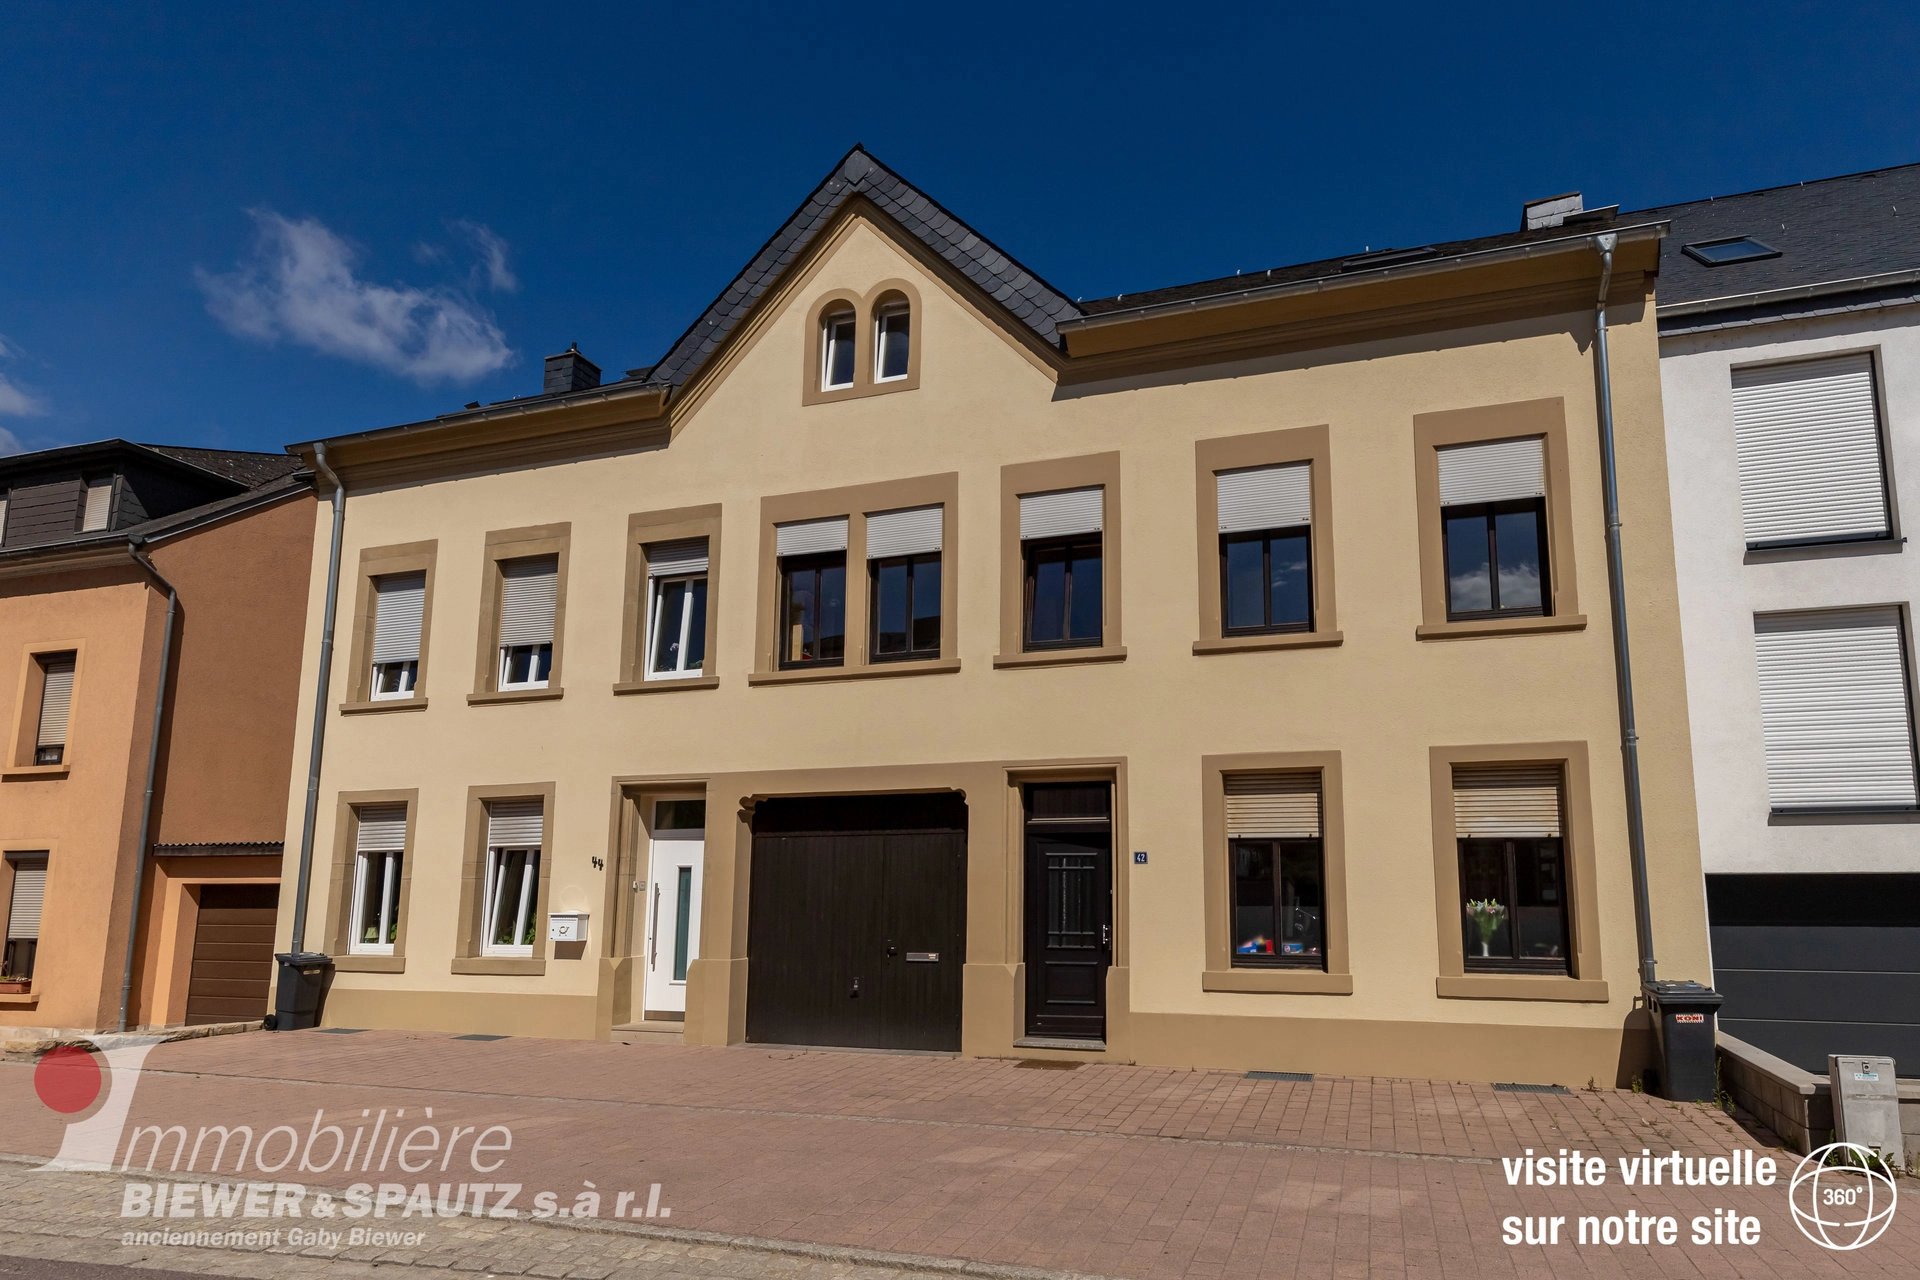 SOLD - semi-detached house with 5 bedrooms in Wasserbillig